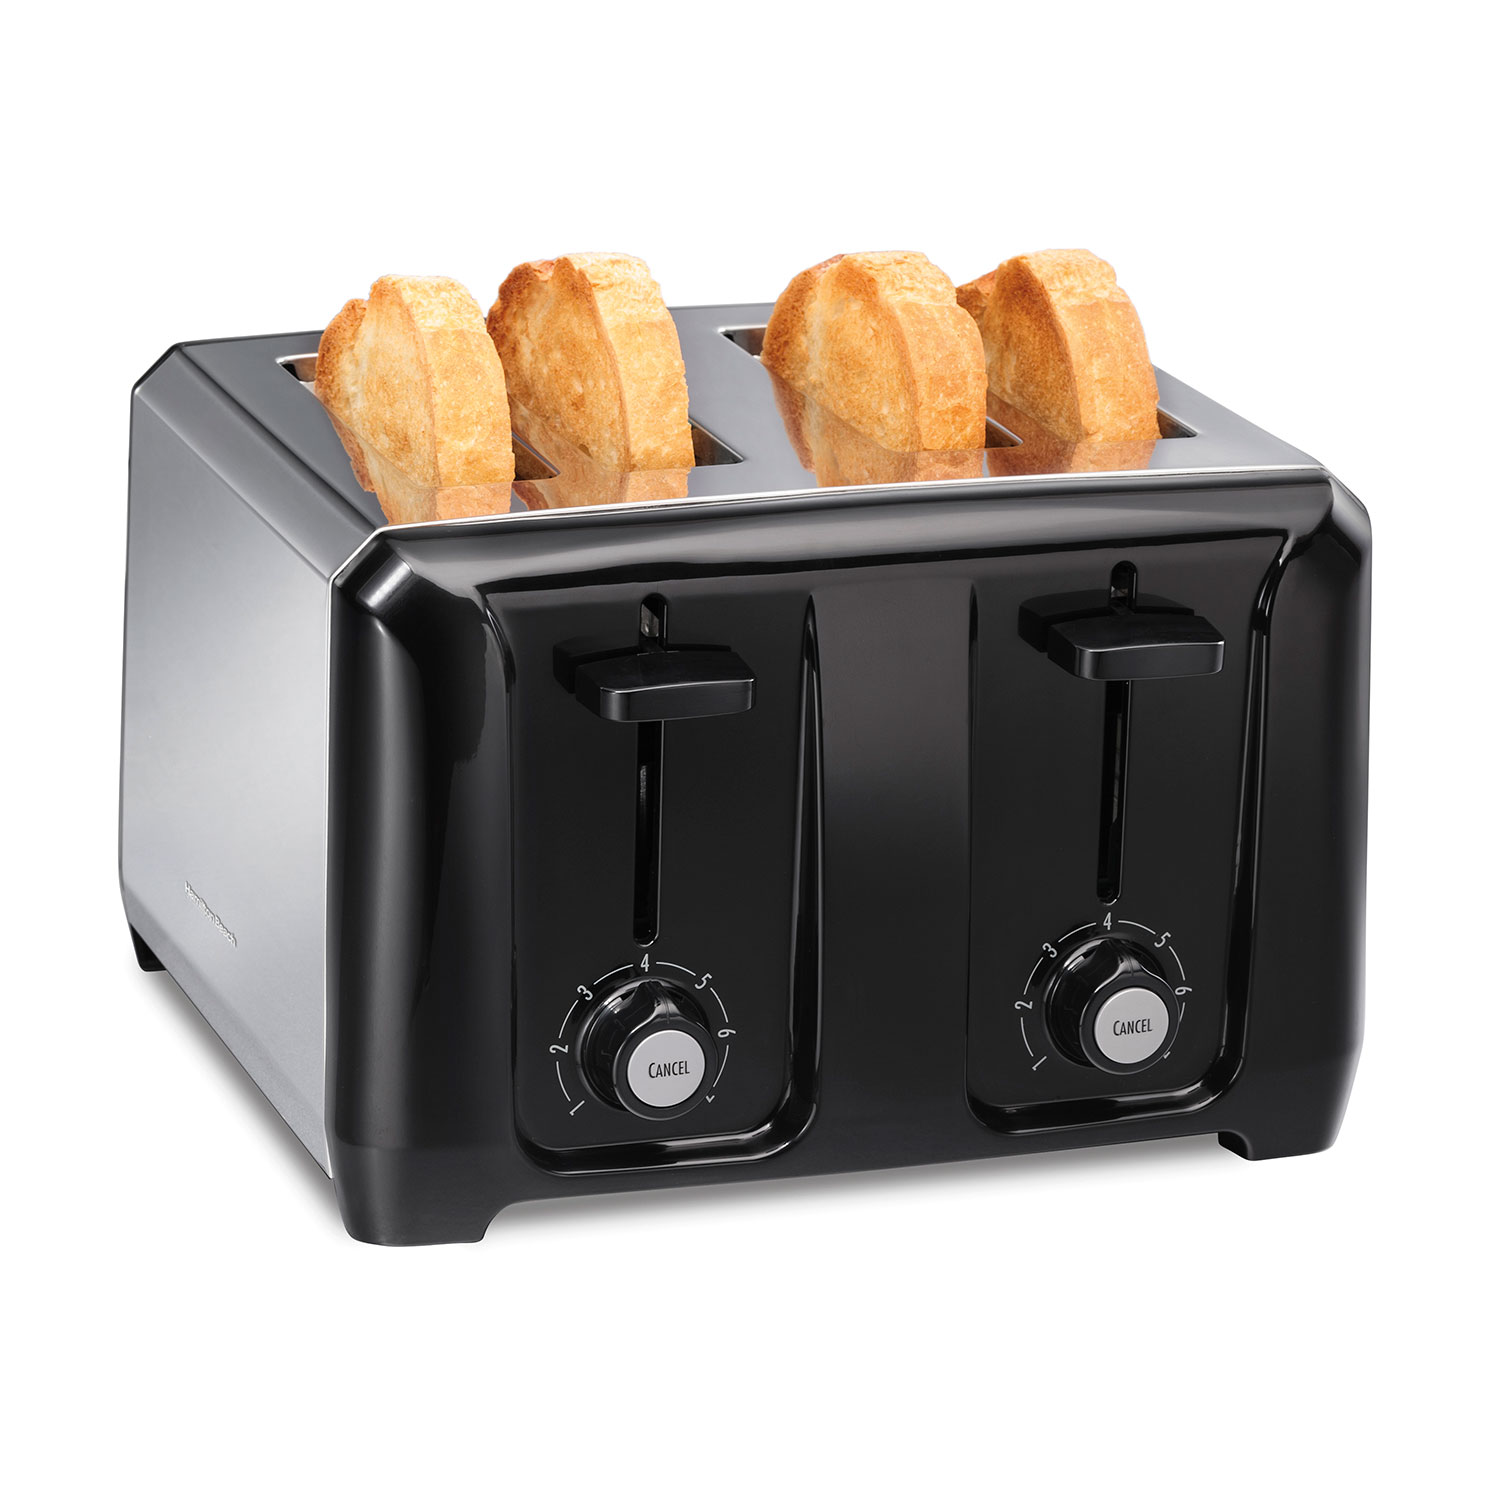 4 Slice Toaster with Toast Boost Stainless Steel (24671)